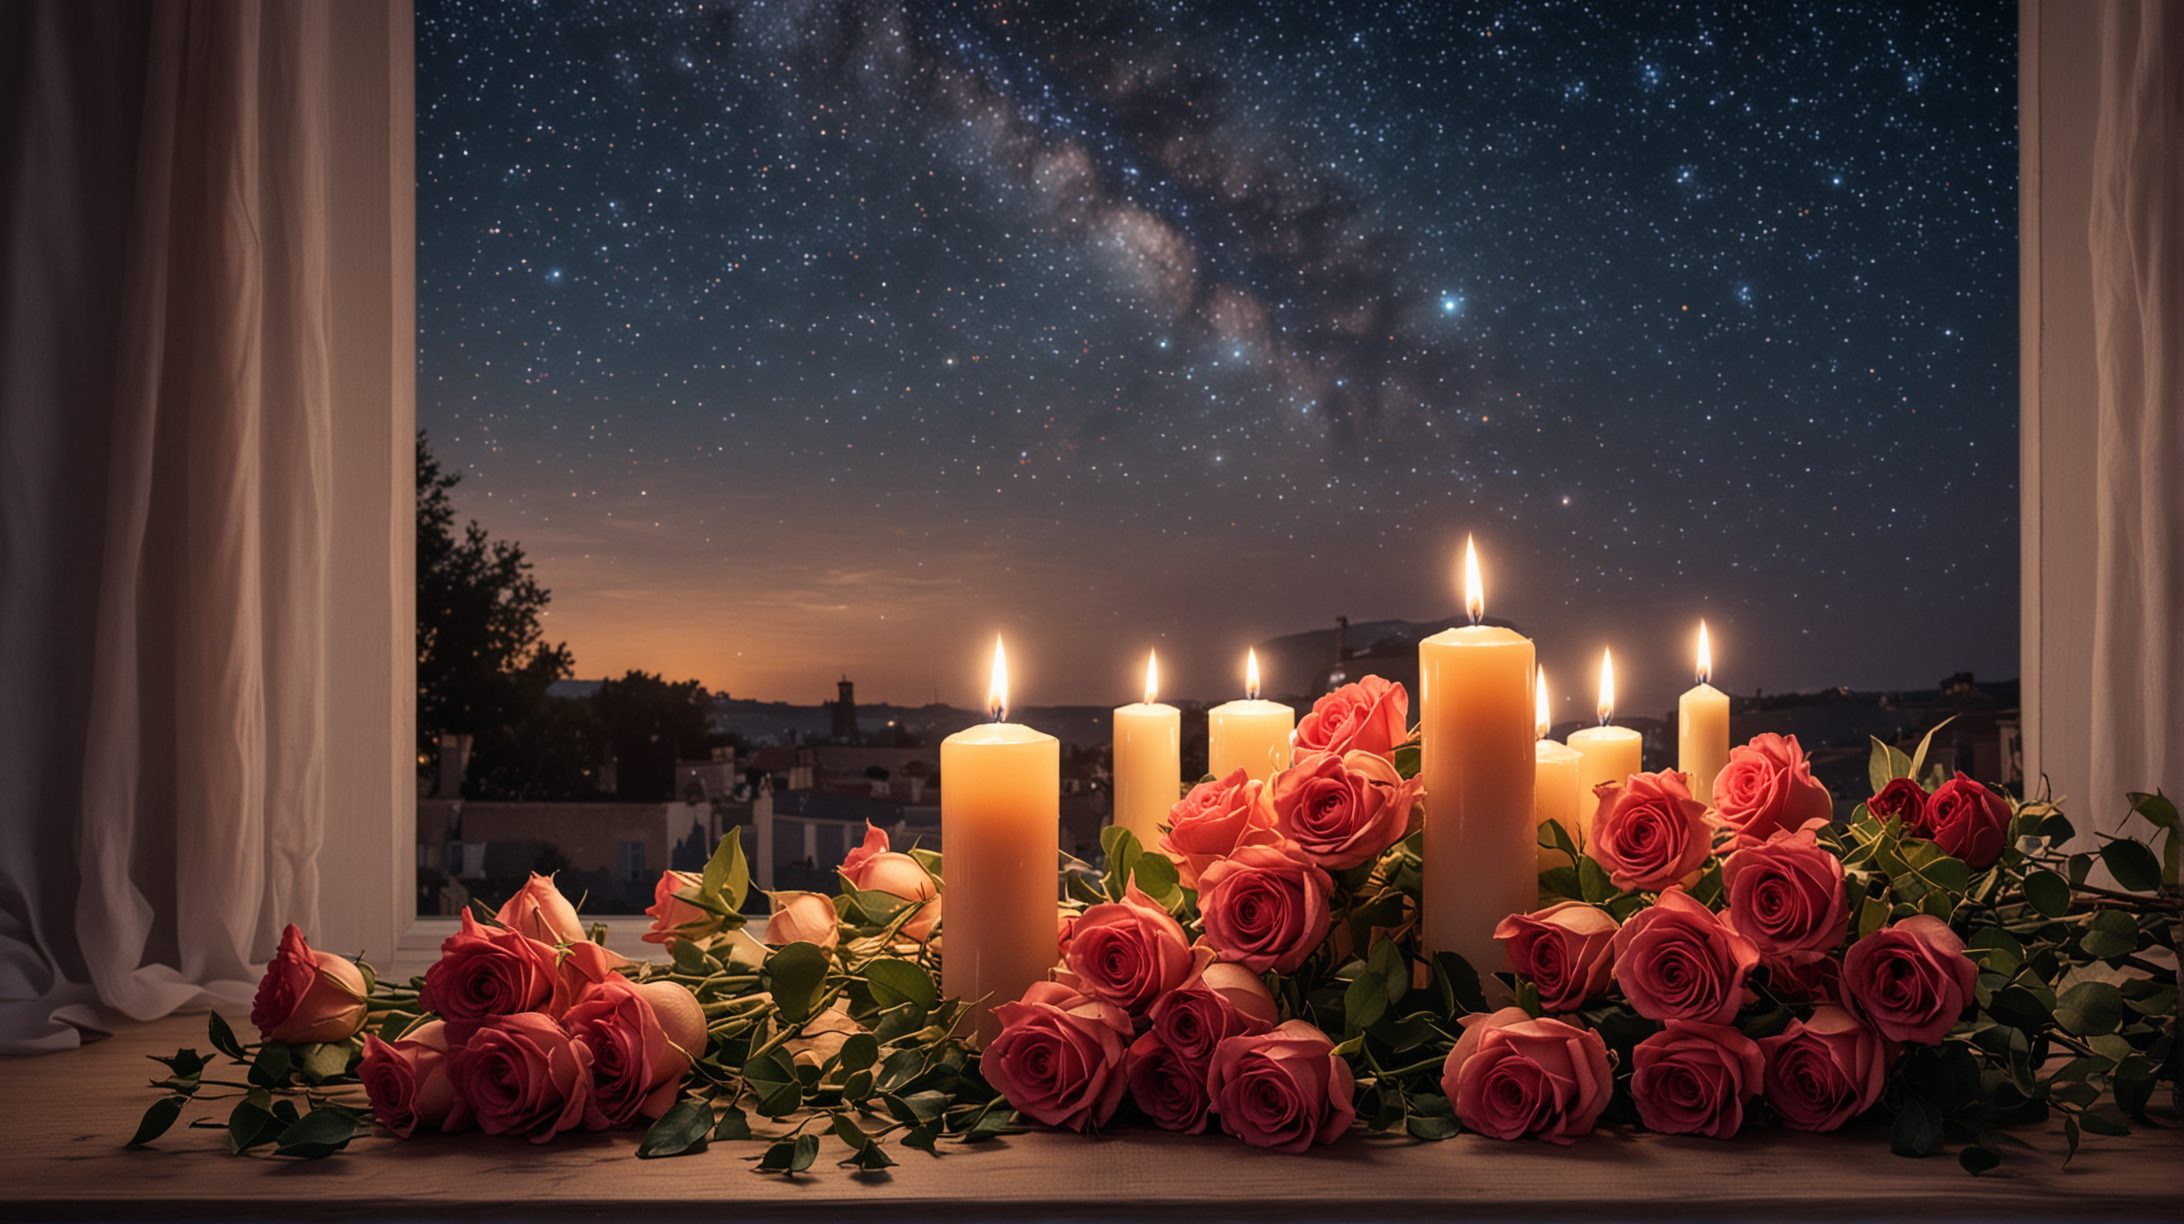 Evening, starry sky, candles, roses flowers